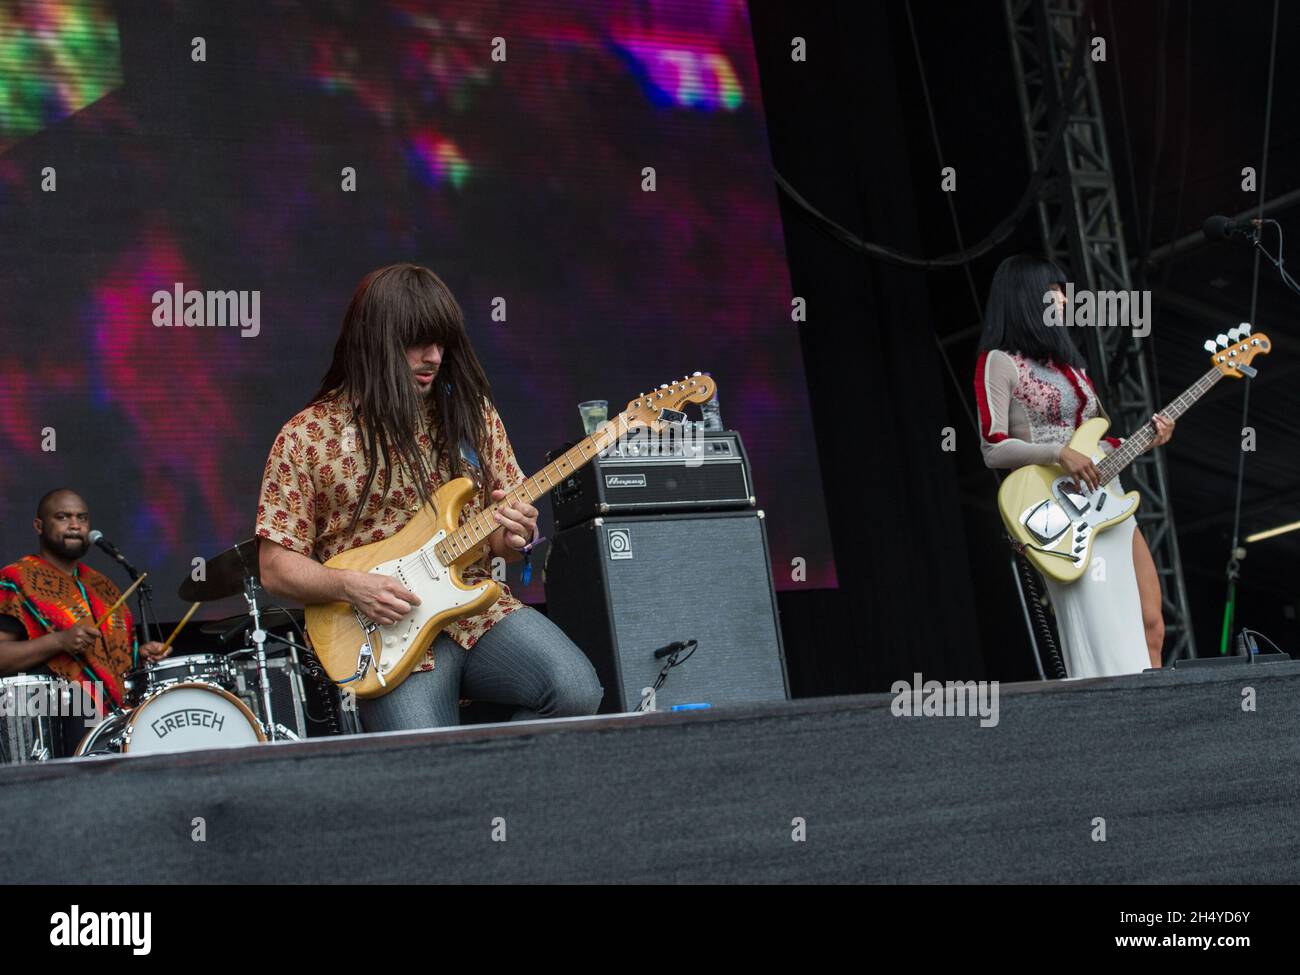 Laura Lee, Mark Speer and Donald Johnson of Khruangbin perform live on stage on day 3 of All Points East festival in Victoria Park on May 27, 2018 in London, England. Picture date: Sunday 27 May, 2018. Photo credit: Katja Ogrin/ EMPICS Entertainment. Stock Photo